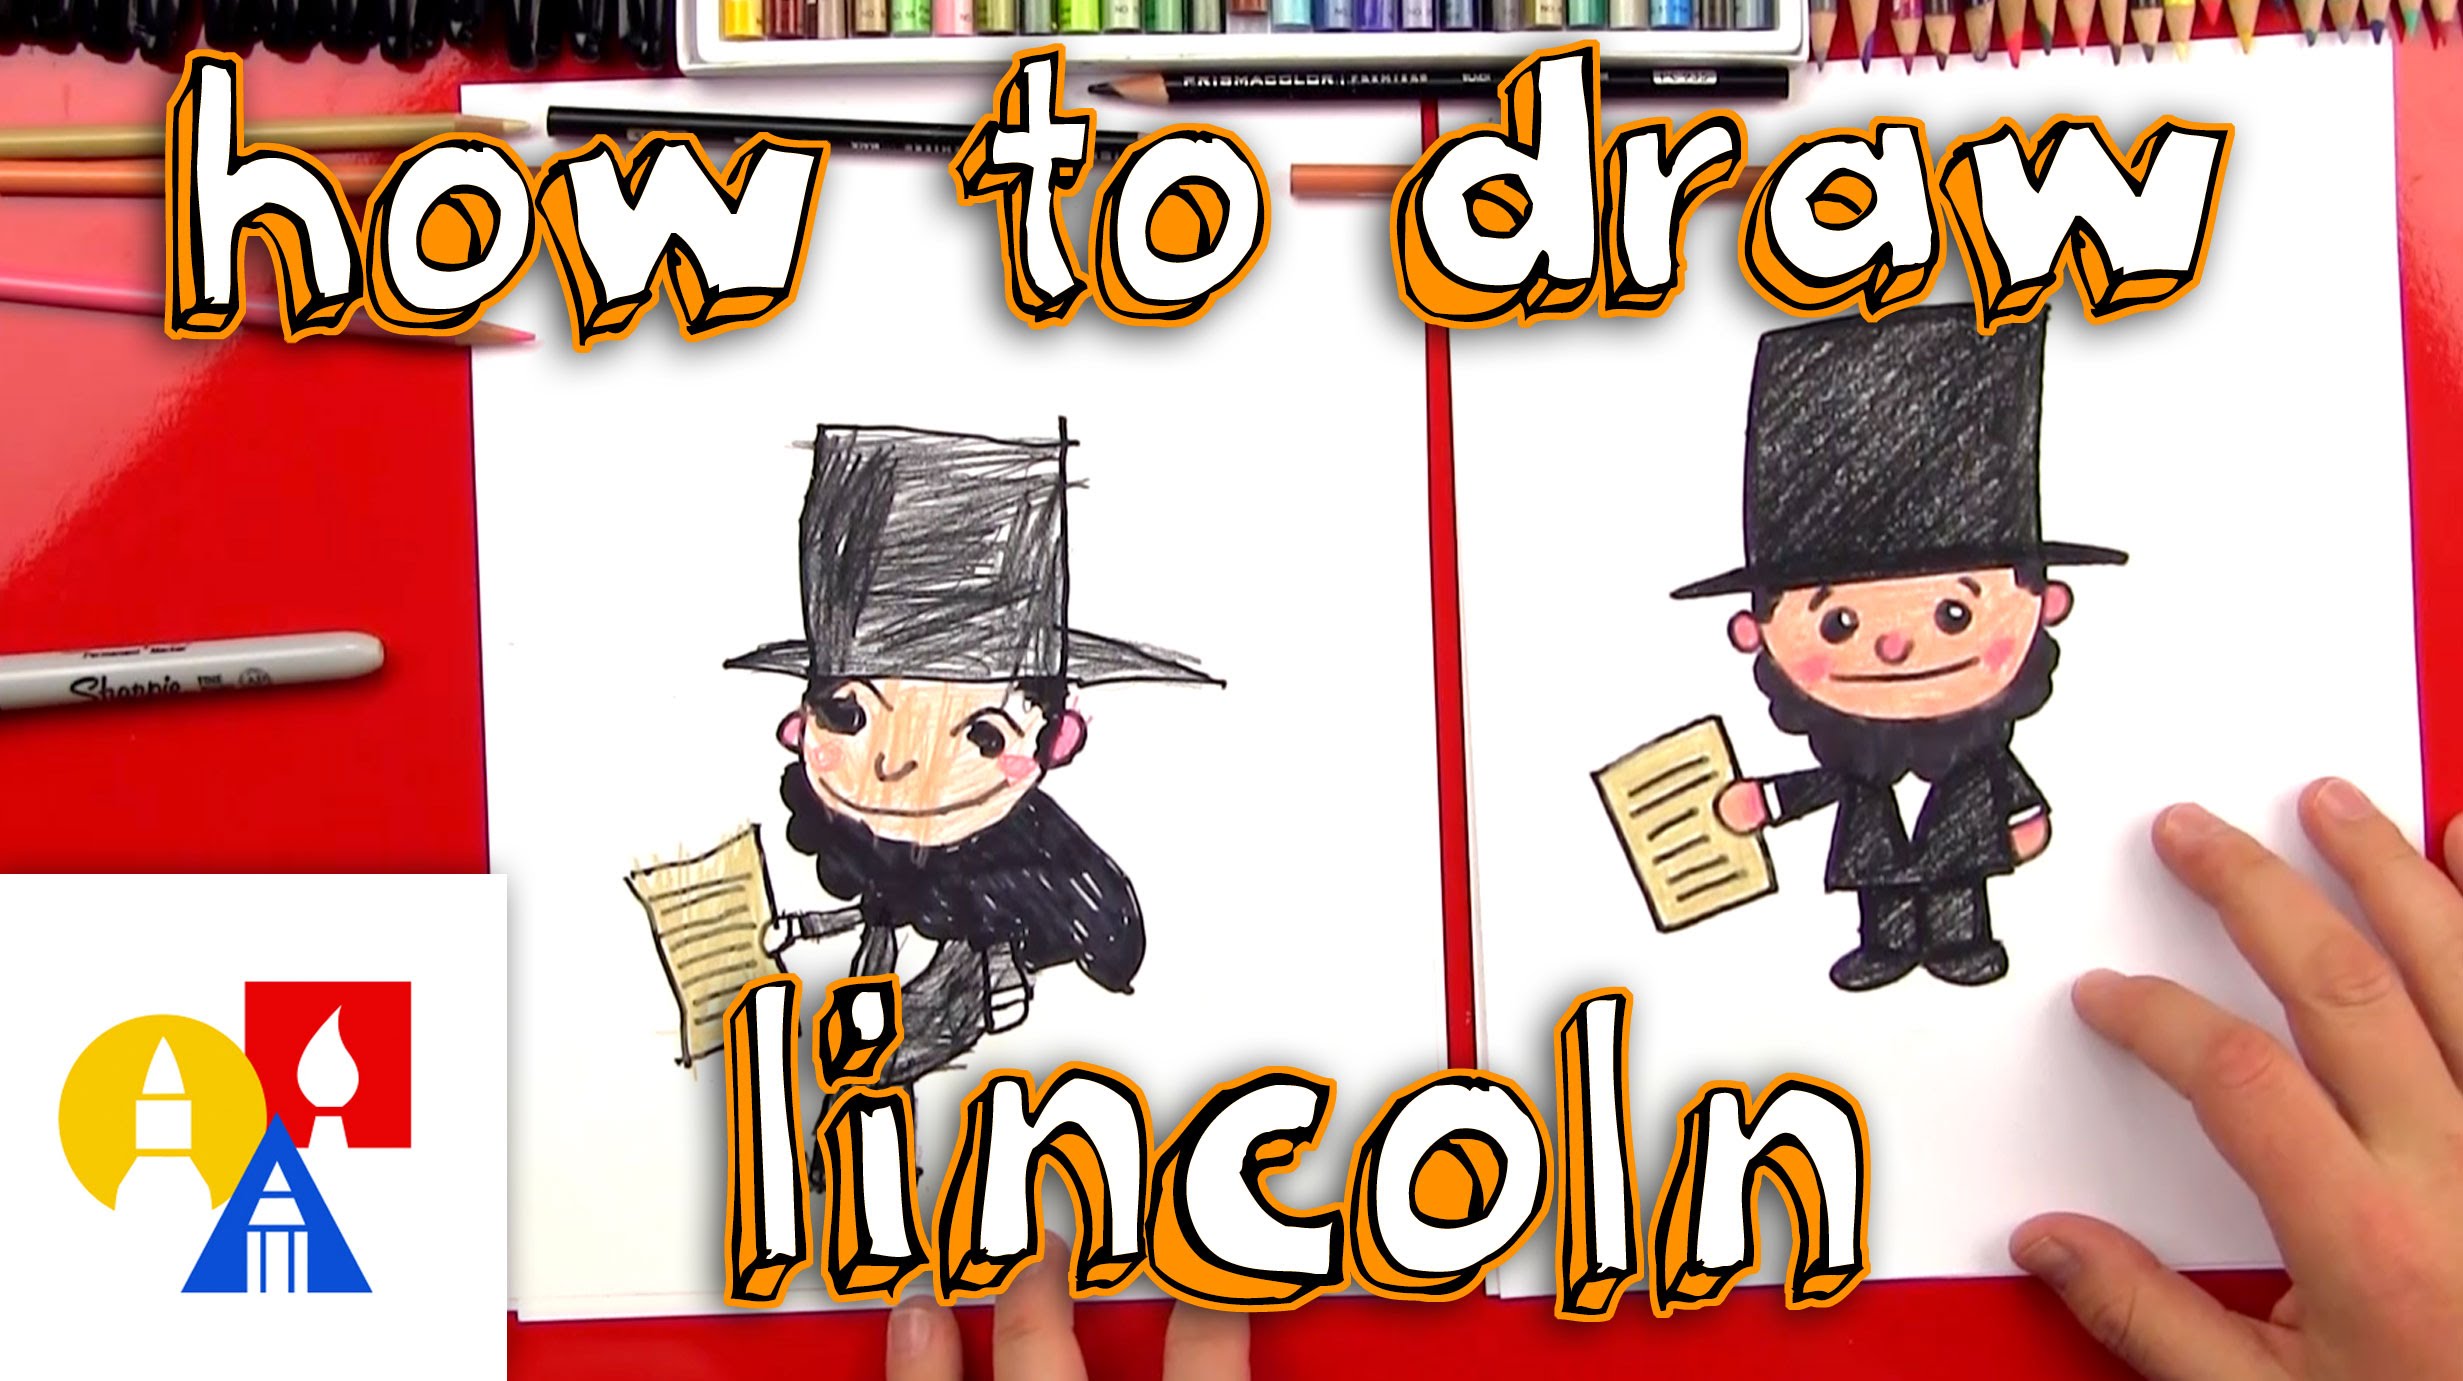 abraham lincoln clipart caricature